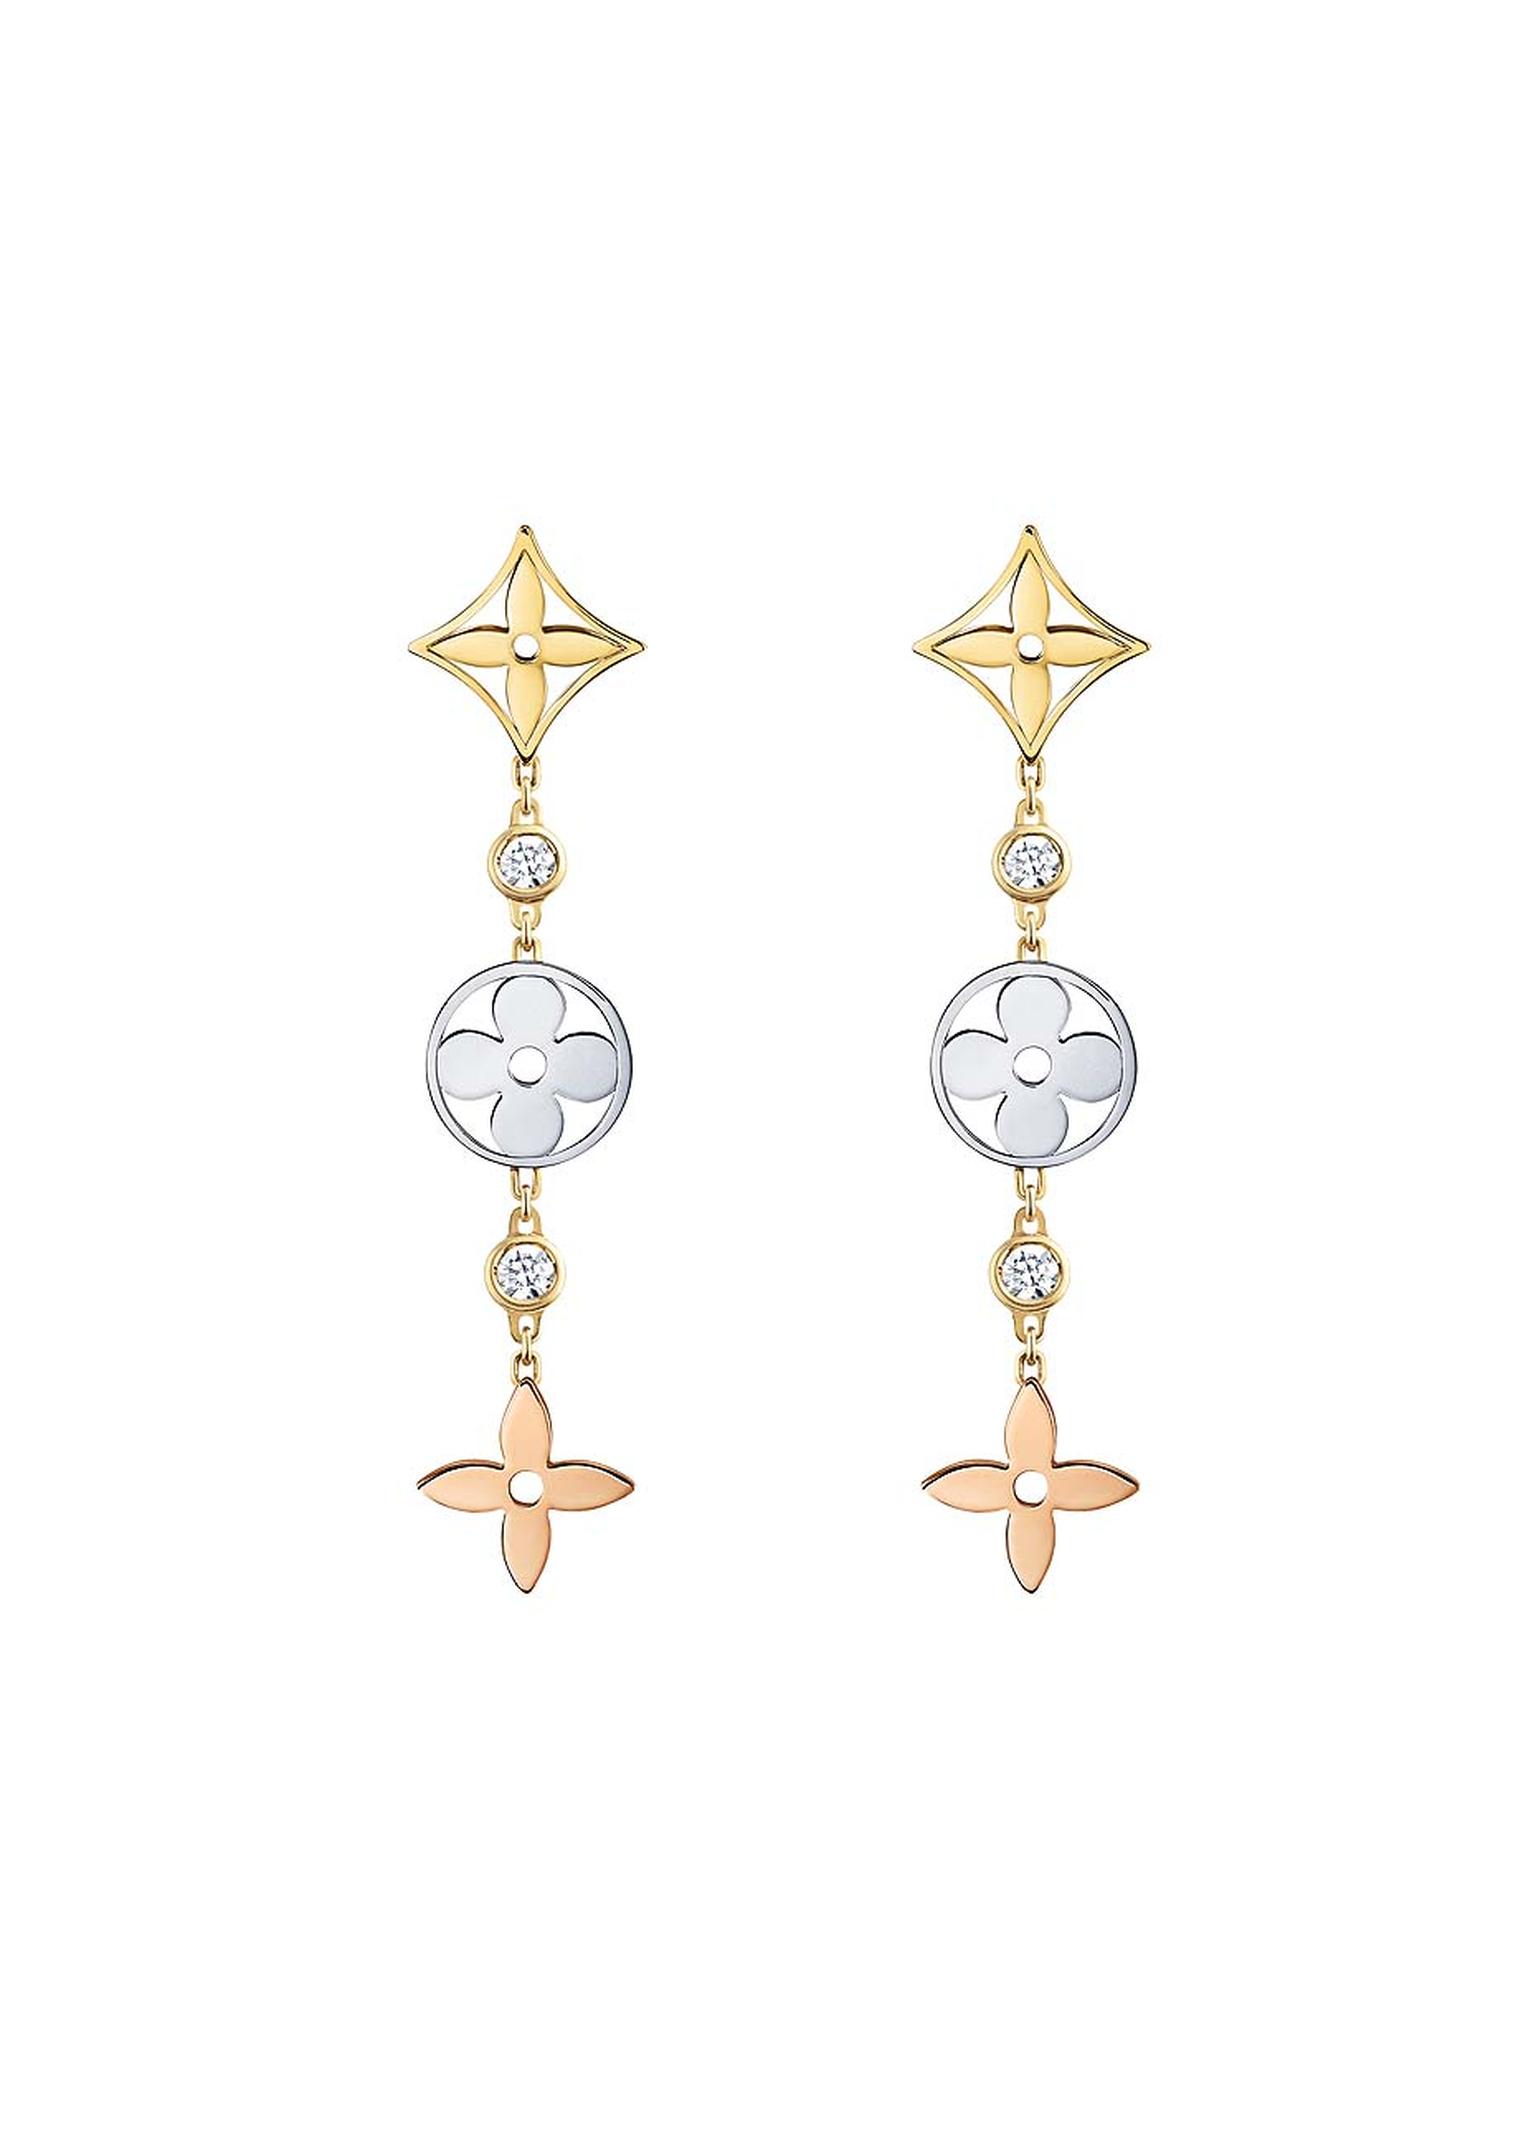 Louis Vuitton earrings in pink, yellow and white gold with